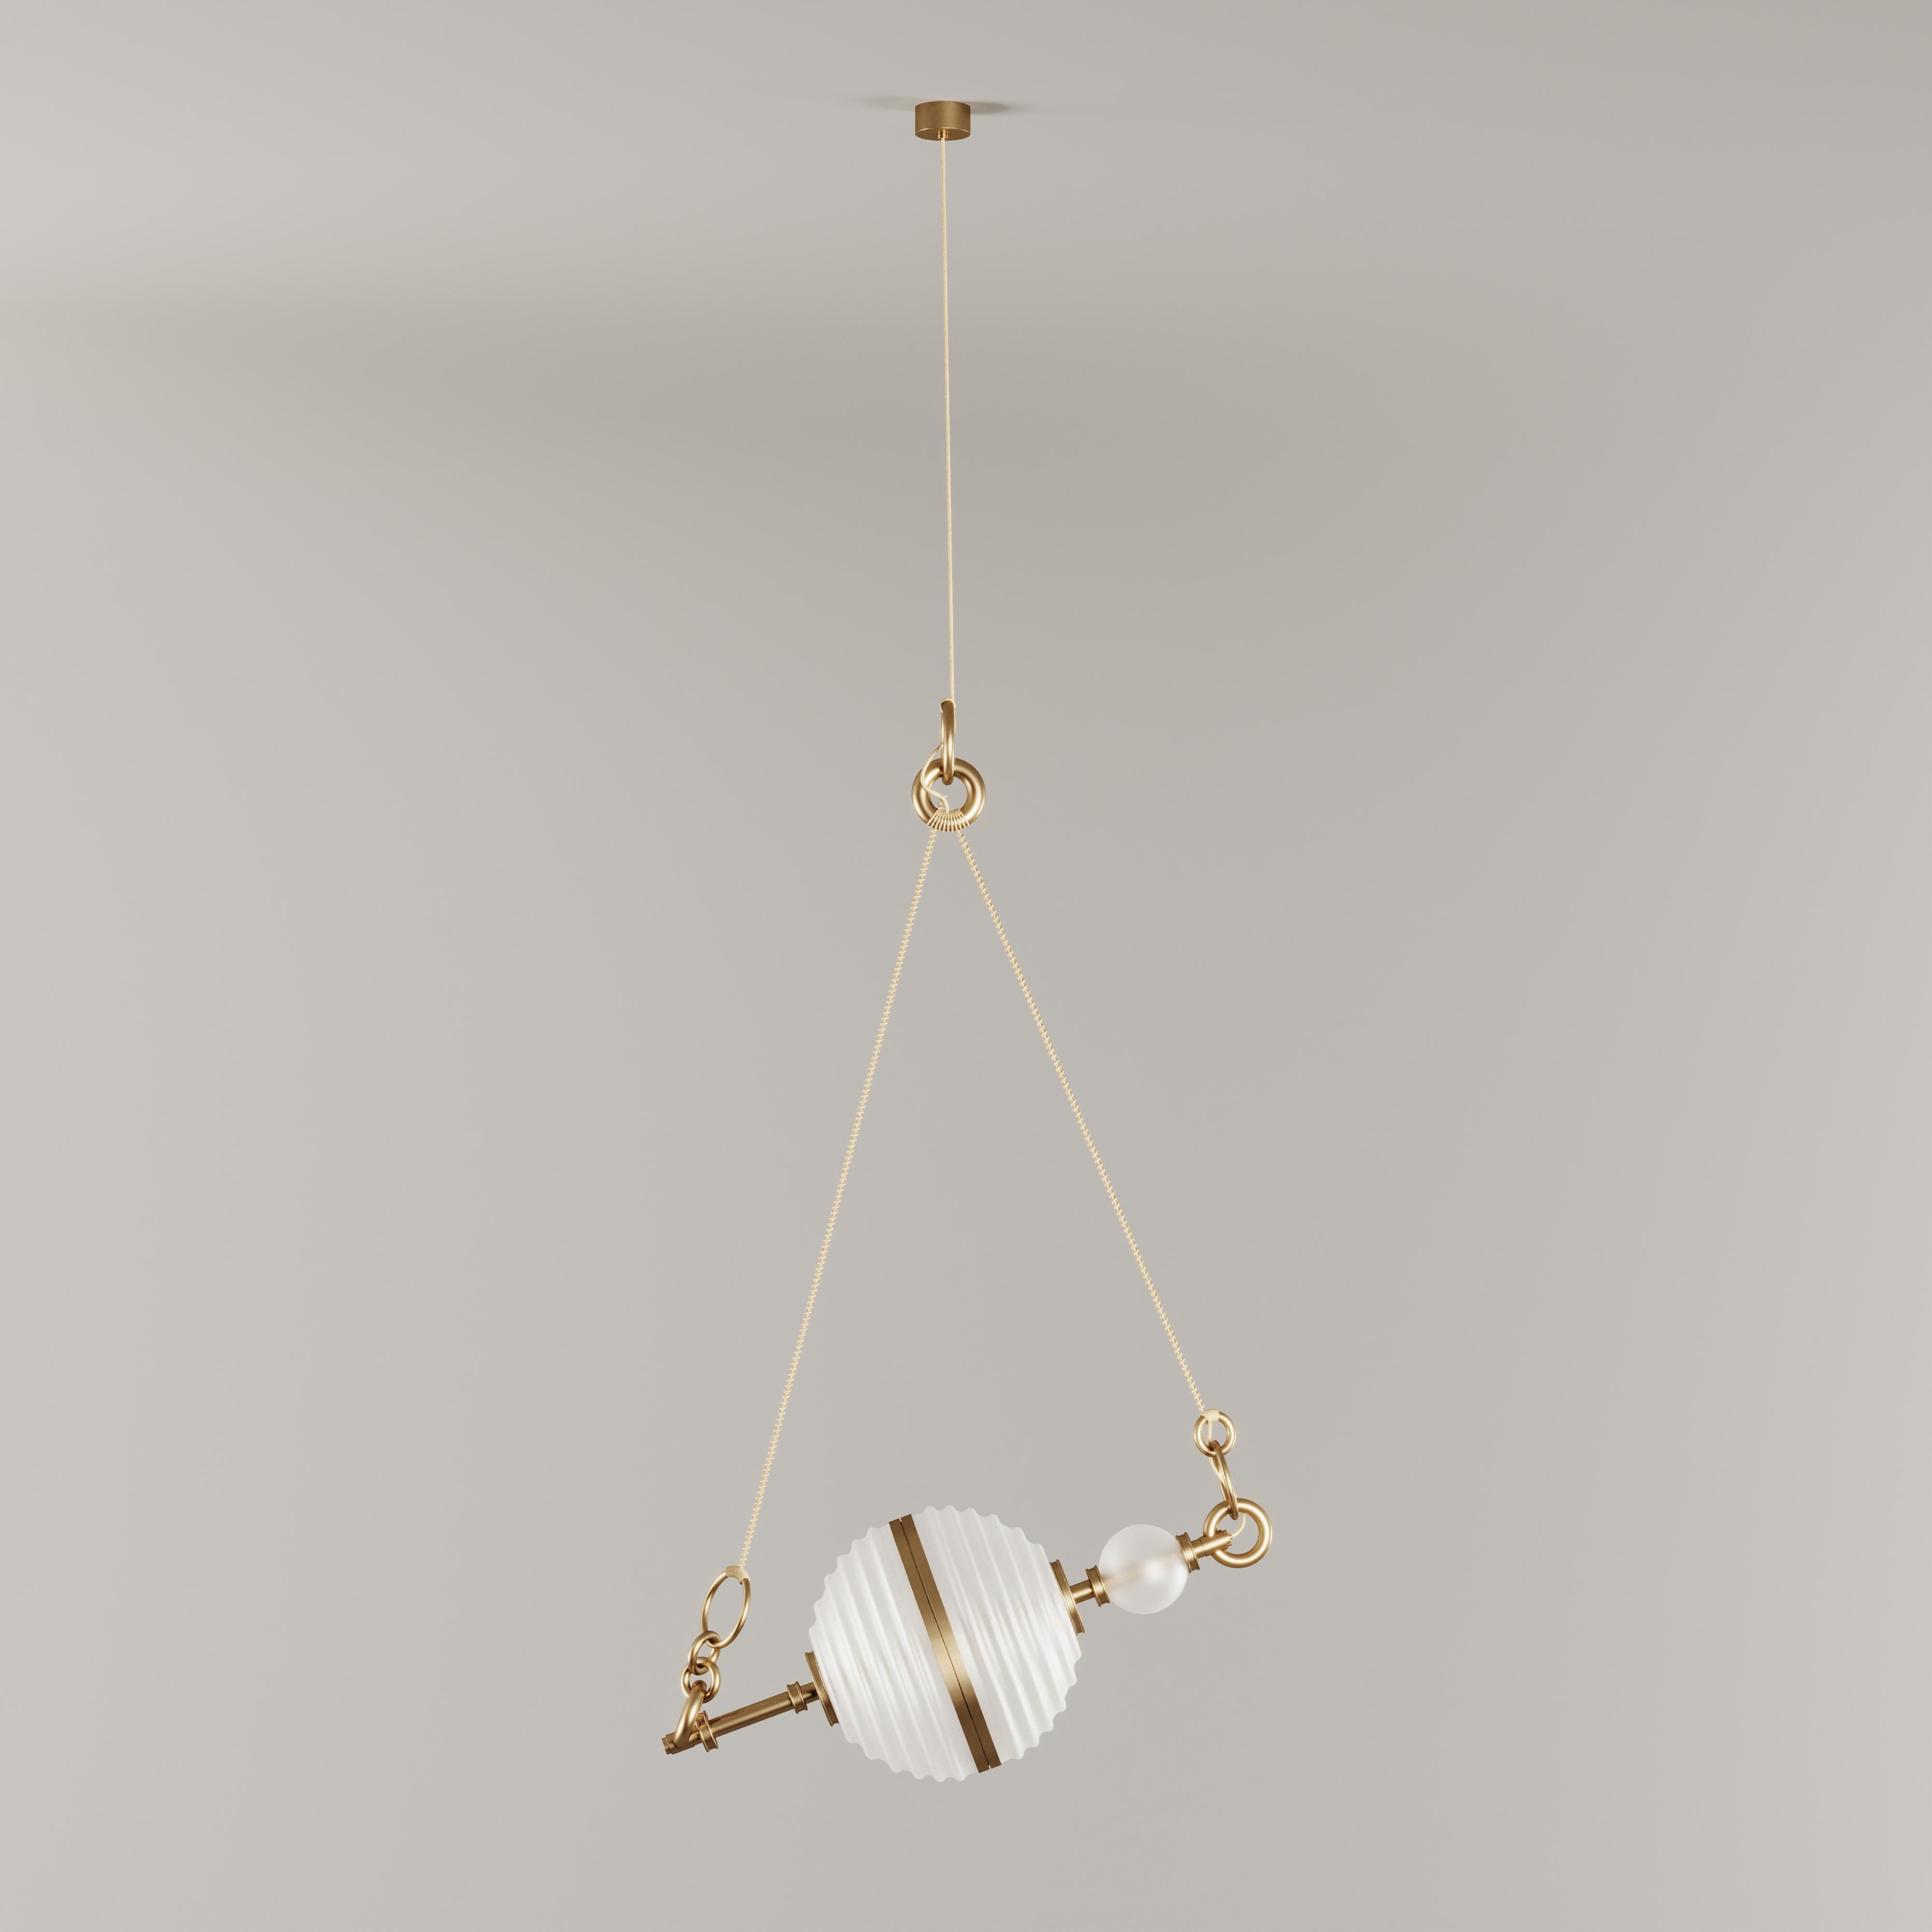 The sixth planet from the sun and the second-largest in the Solar System, Saturn was the inspiration behind this aesthetic suspension lamp design. 
Composed of one white frosted glass lampshade embellished with brushed brass around its shape that